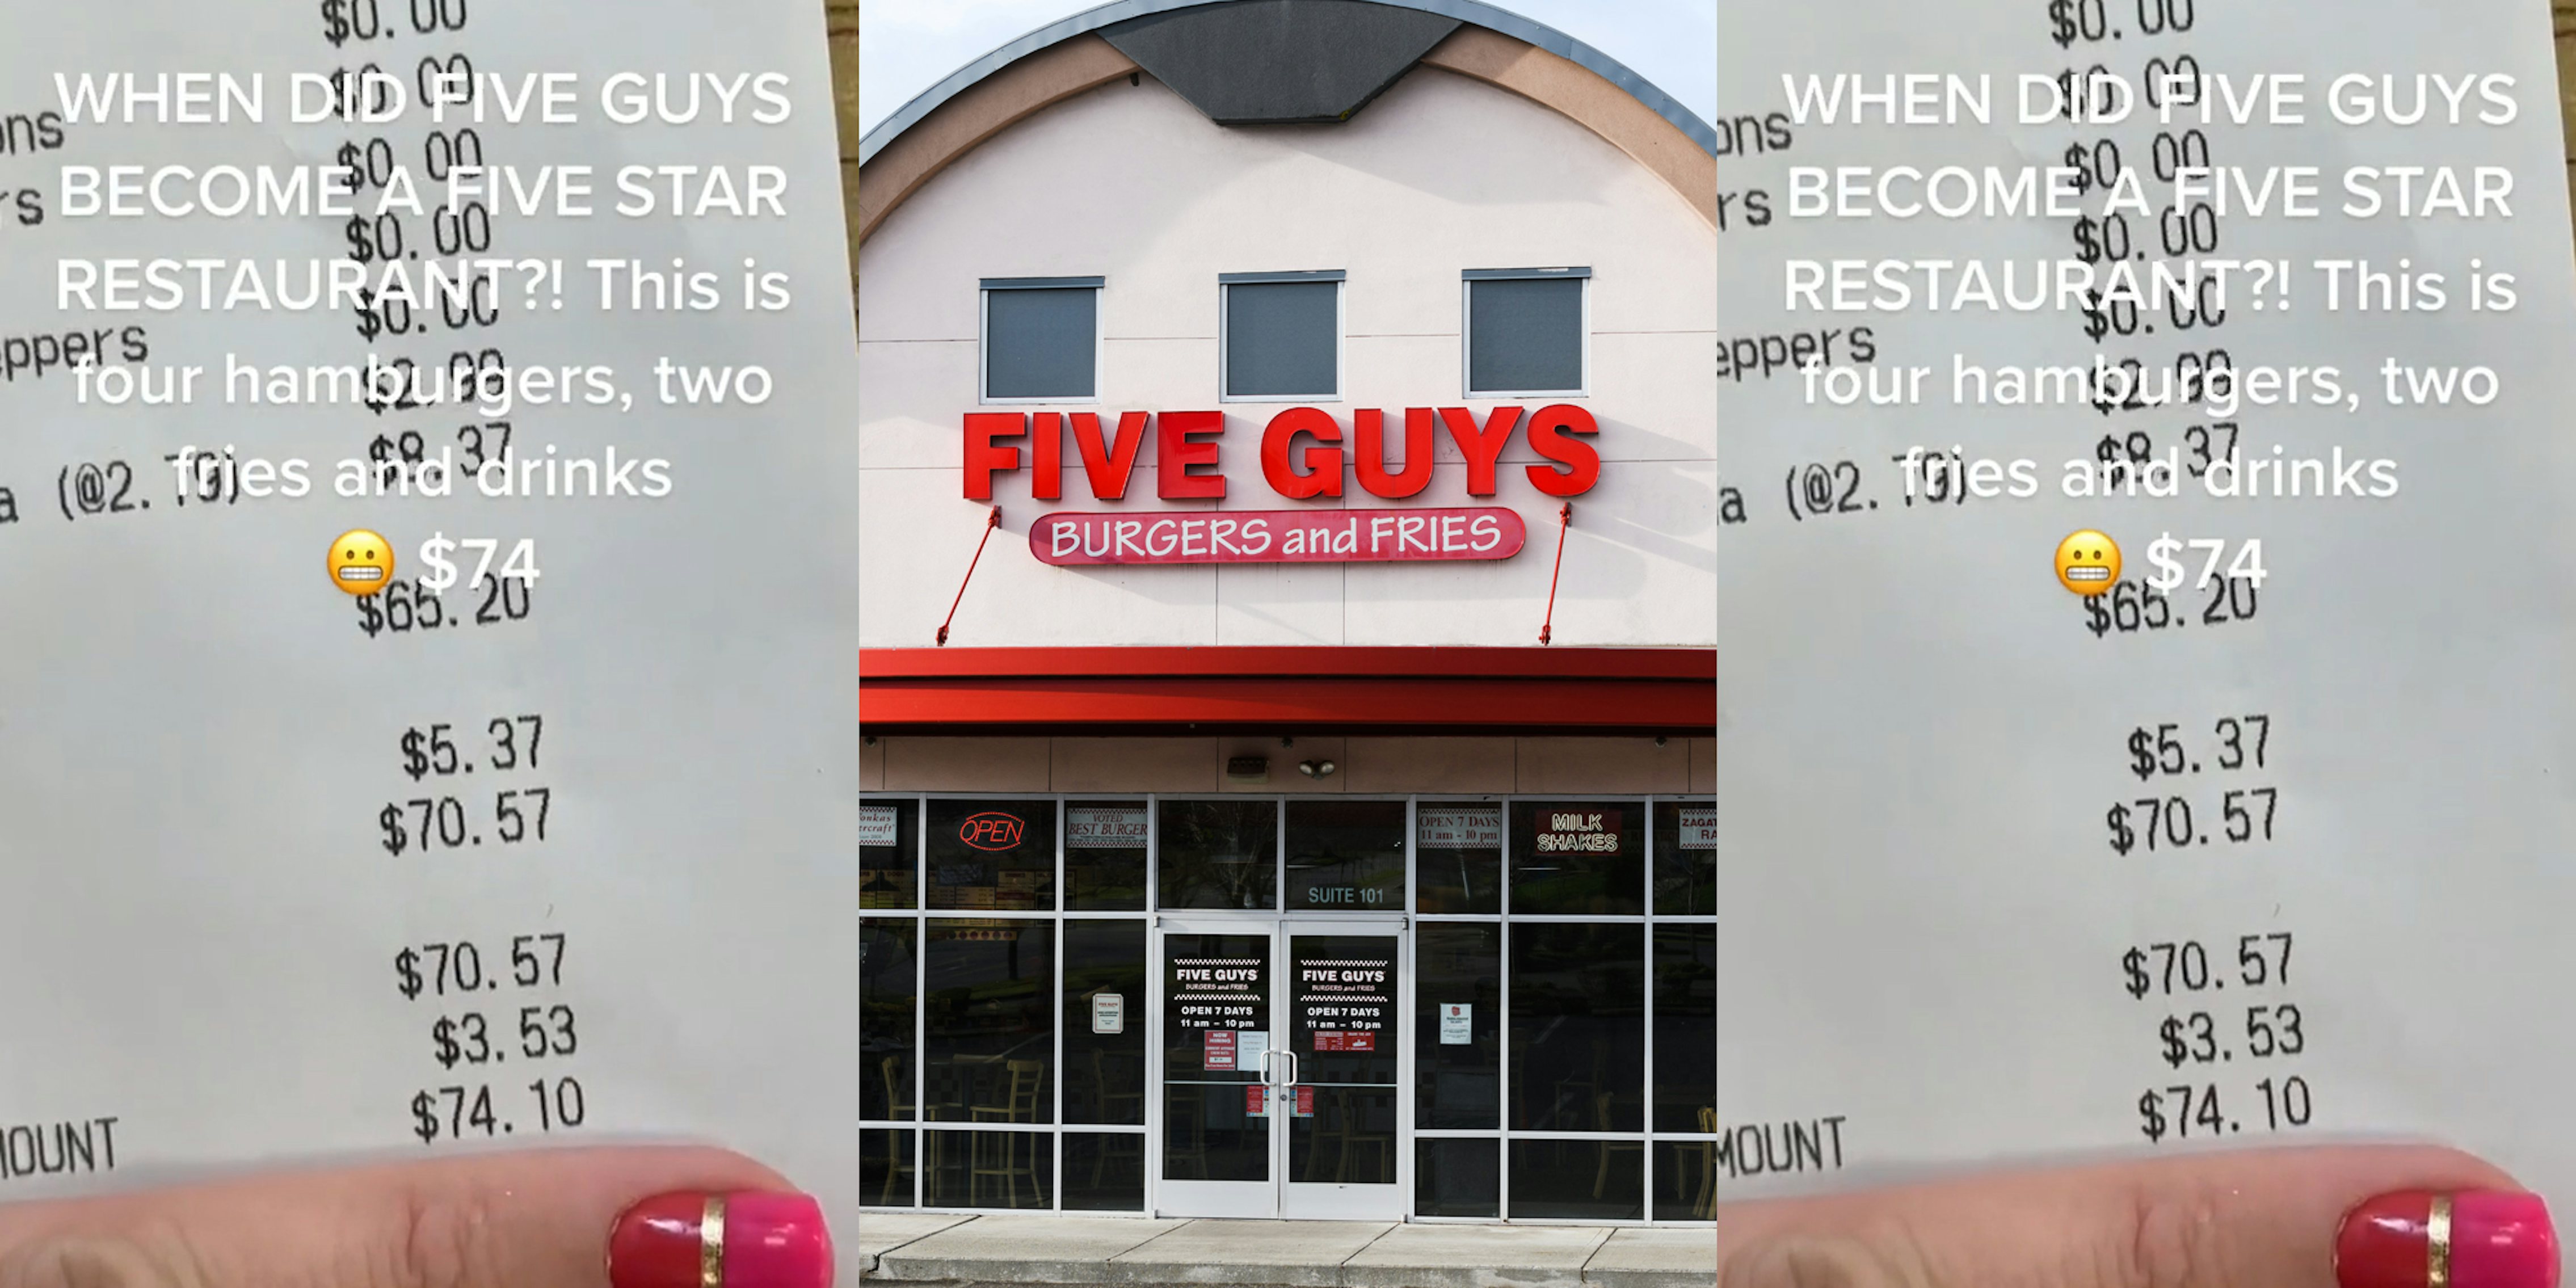 woman holding receipt with total at $74.10 caption ' WHEN DID FIVE GUYS BECOME A FIVE STAR RESTAURANT?! This is four hamburgers, two fries and drinks $74' (l) Five Guys sign on building (c) woman holding receipt with total at $74.10 caption ' WHEN DID FIVE GUYS BECOME A FIVE STAR RESTAURANT?! This is four hamburgers, two fries and drinks $74' (r)